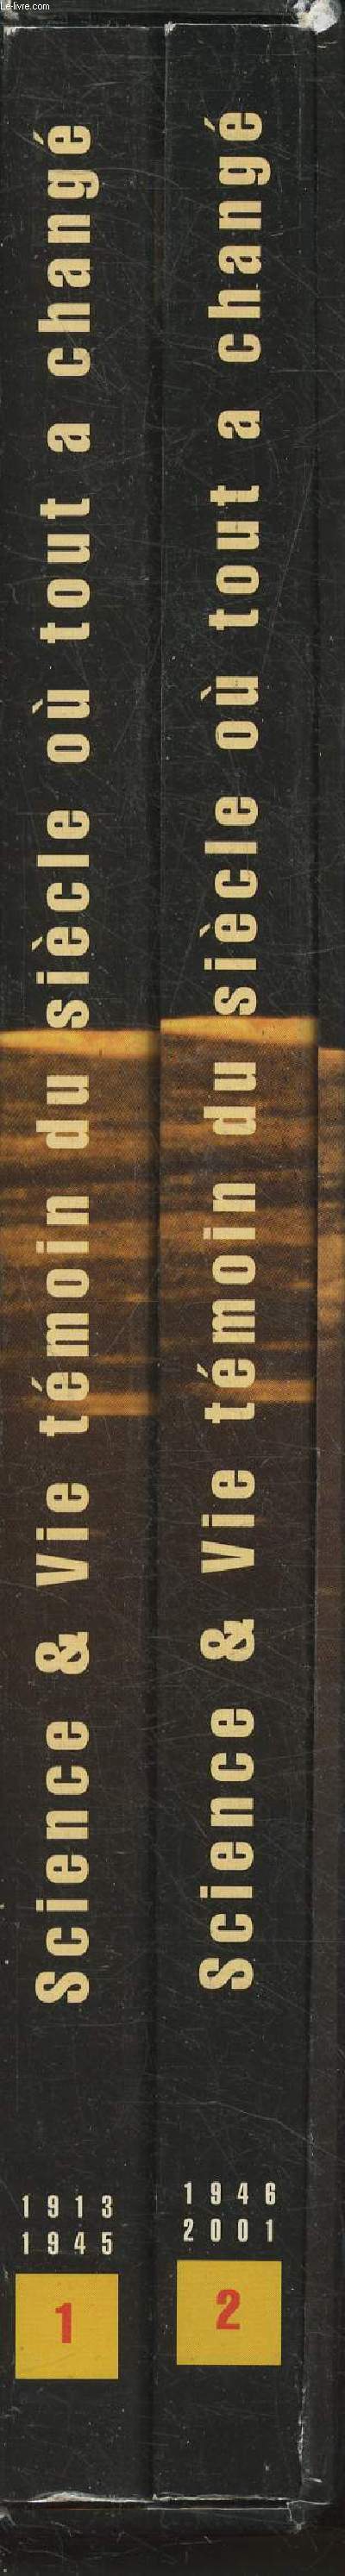 Science & Vie - Tmoin du sicle o tout  changer- Tome I: 1913-1945 et Tome II: 1946-2001 (2 volumes)